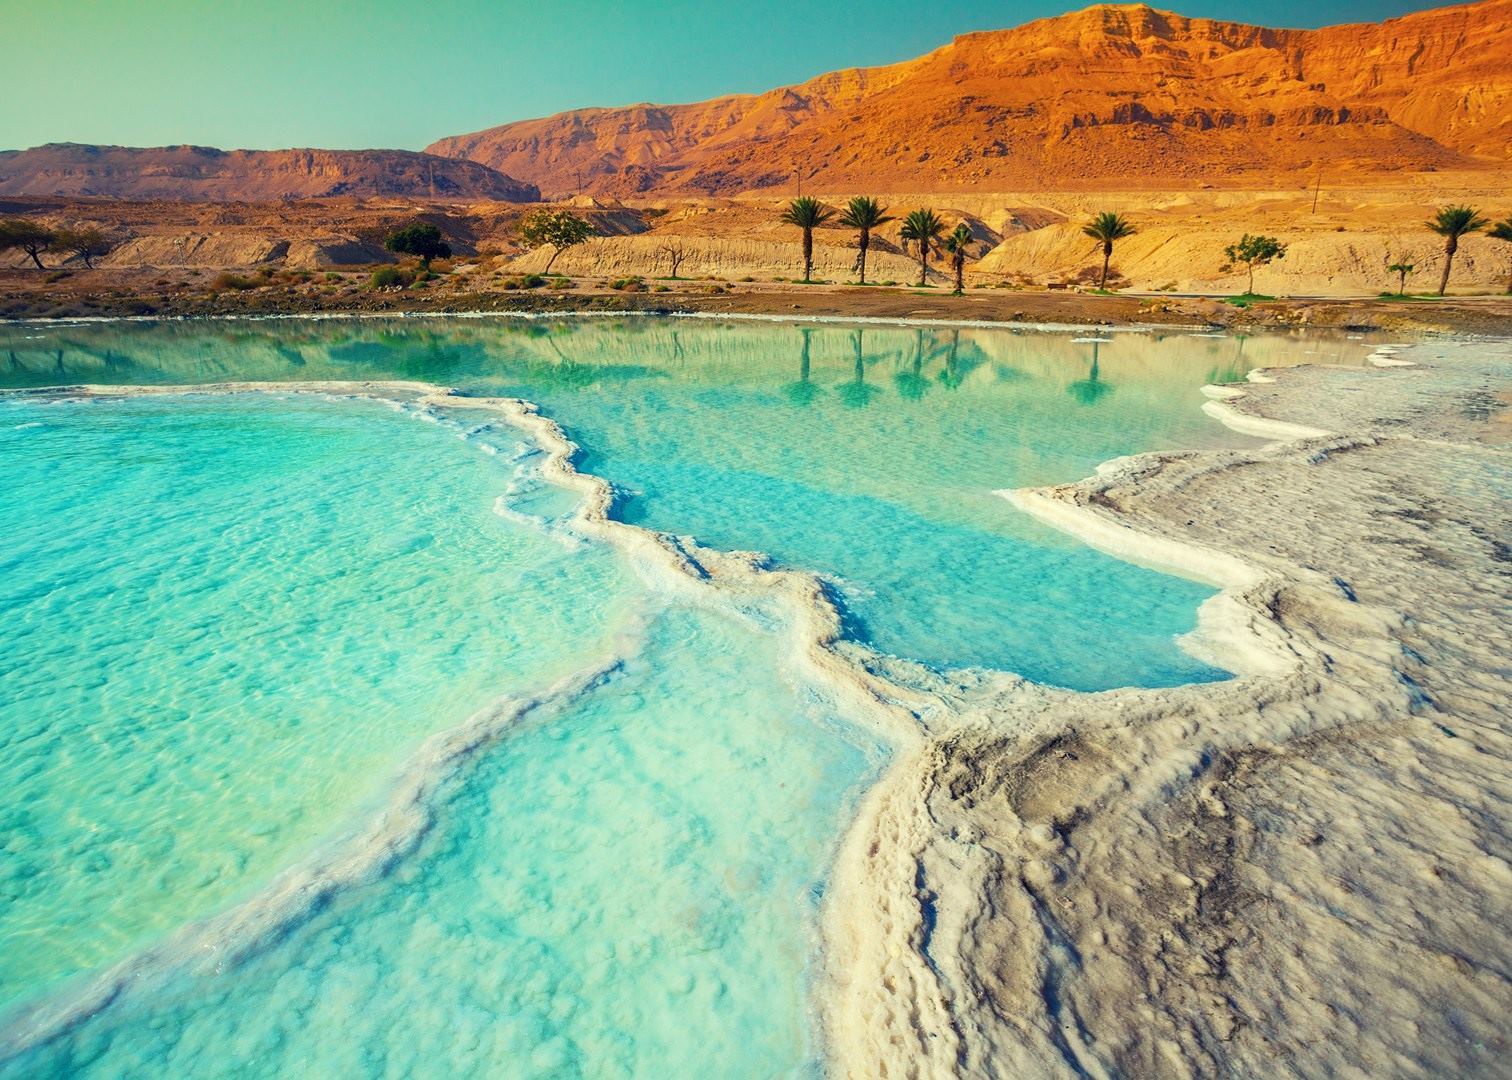 Visit The Dead Sea on a trip to Jordan | Audley Travel